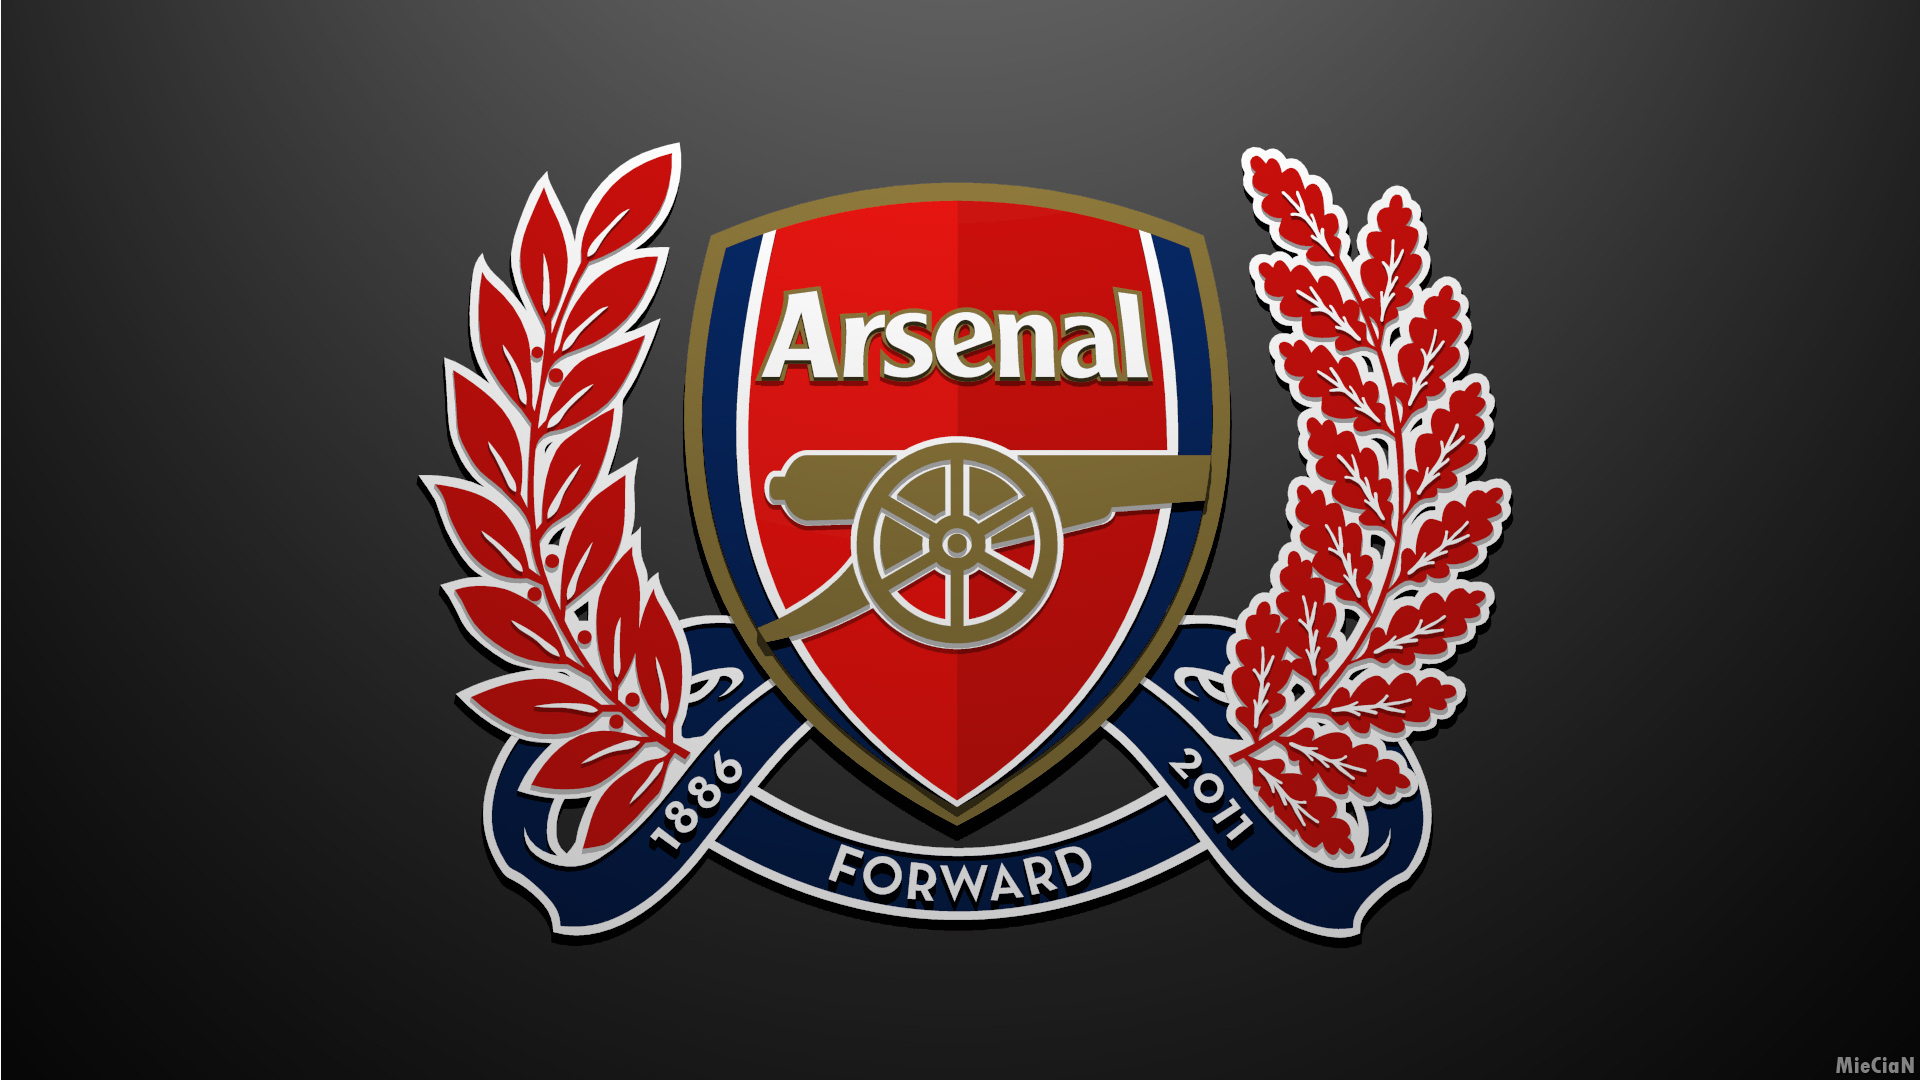 Arsenal Fc Wallpaper For iPhone Android Windows Hot HD